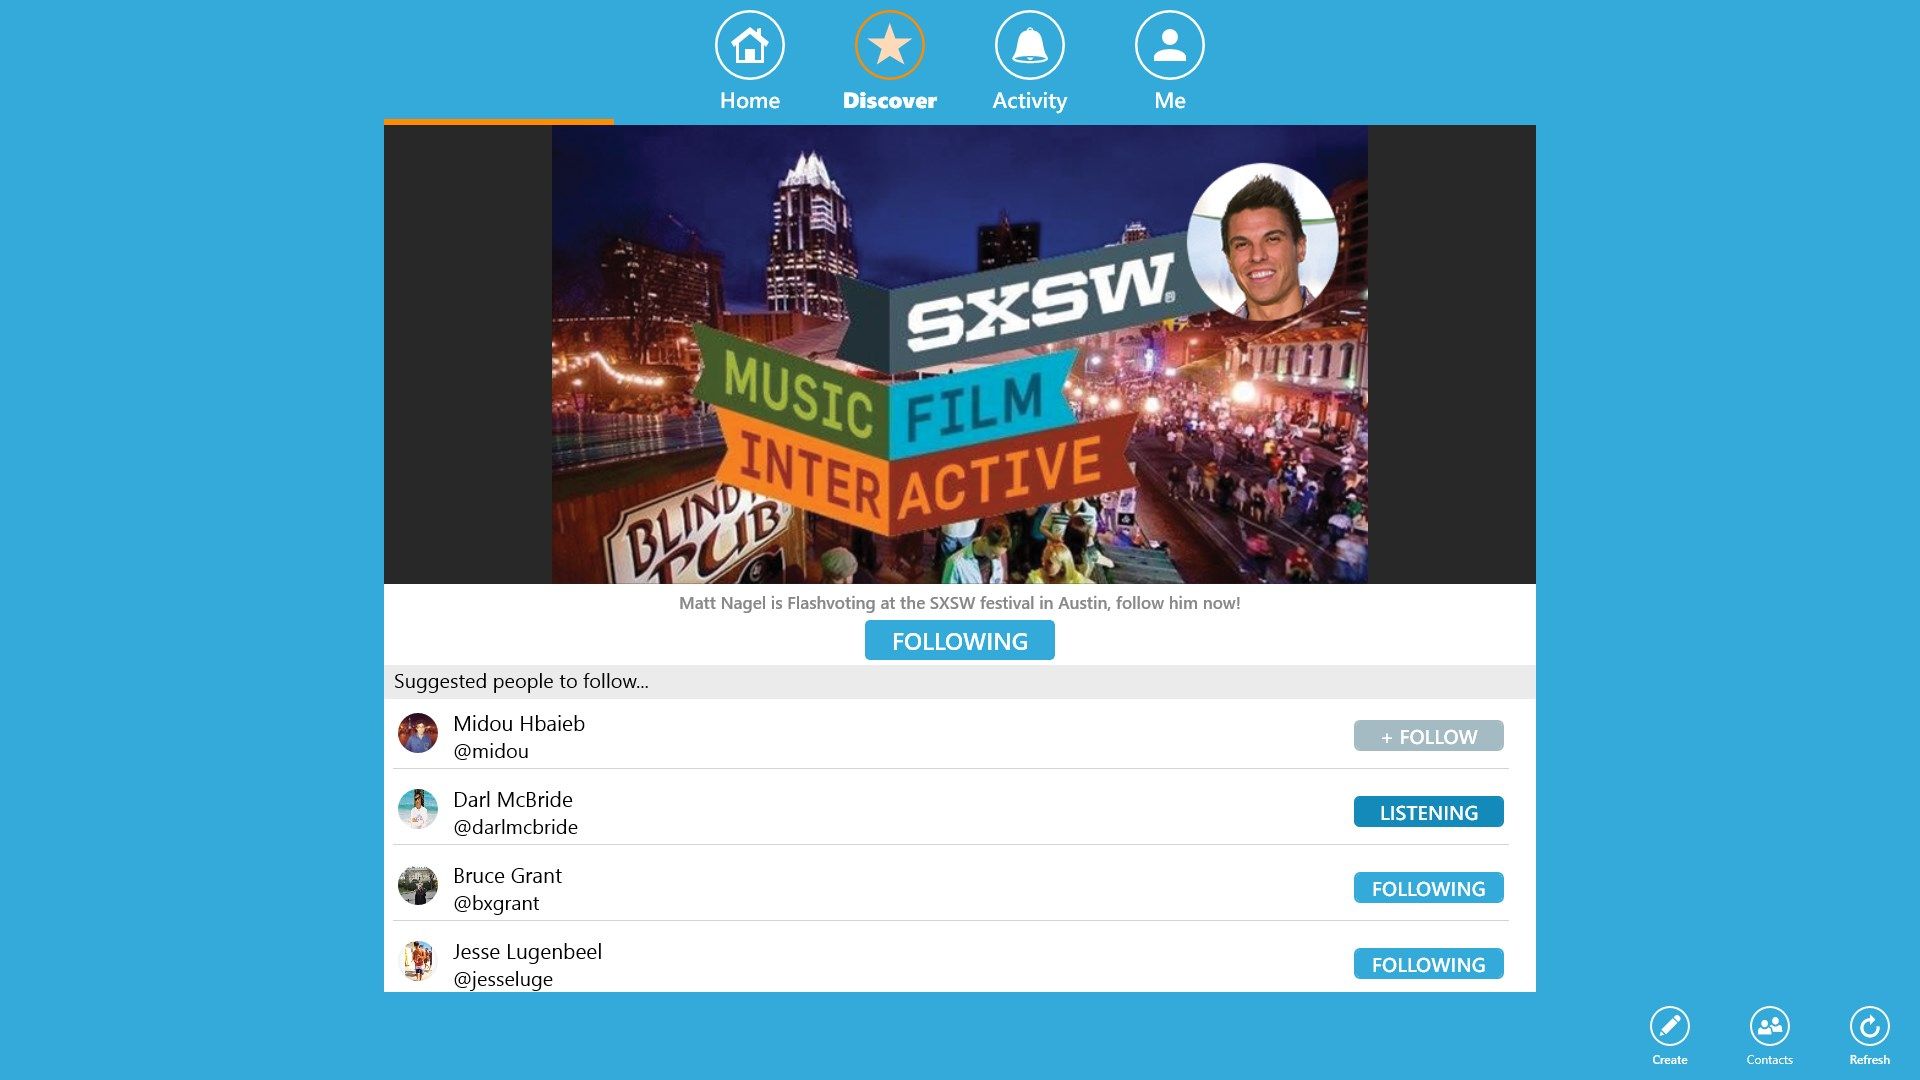 Find people to follow on the Discover tab.